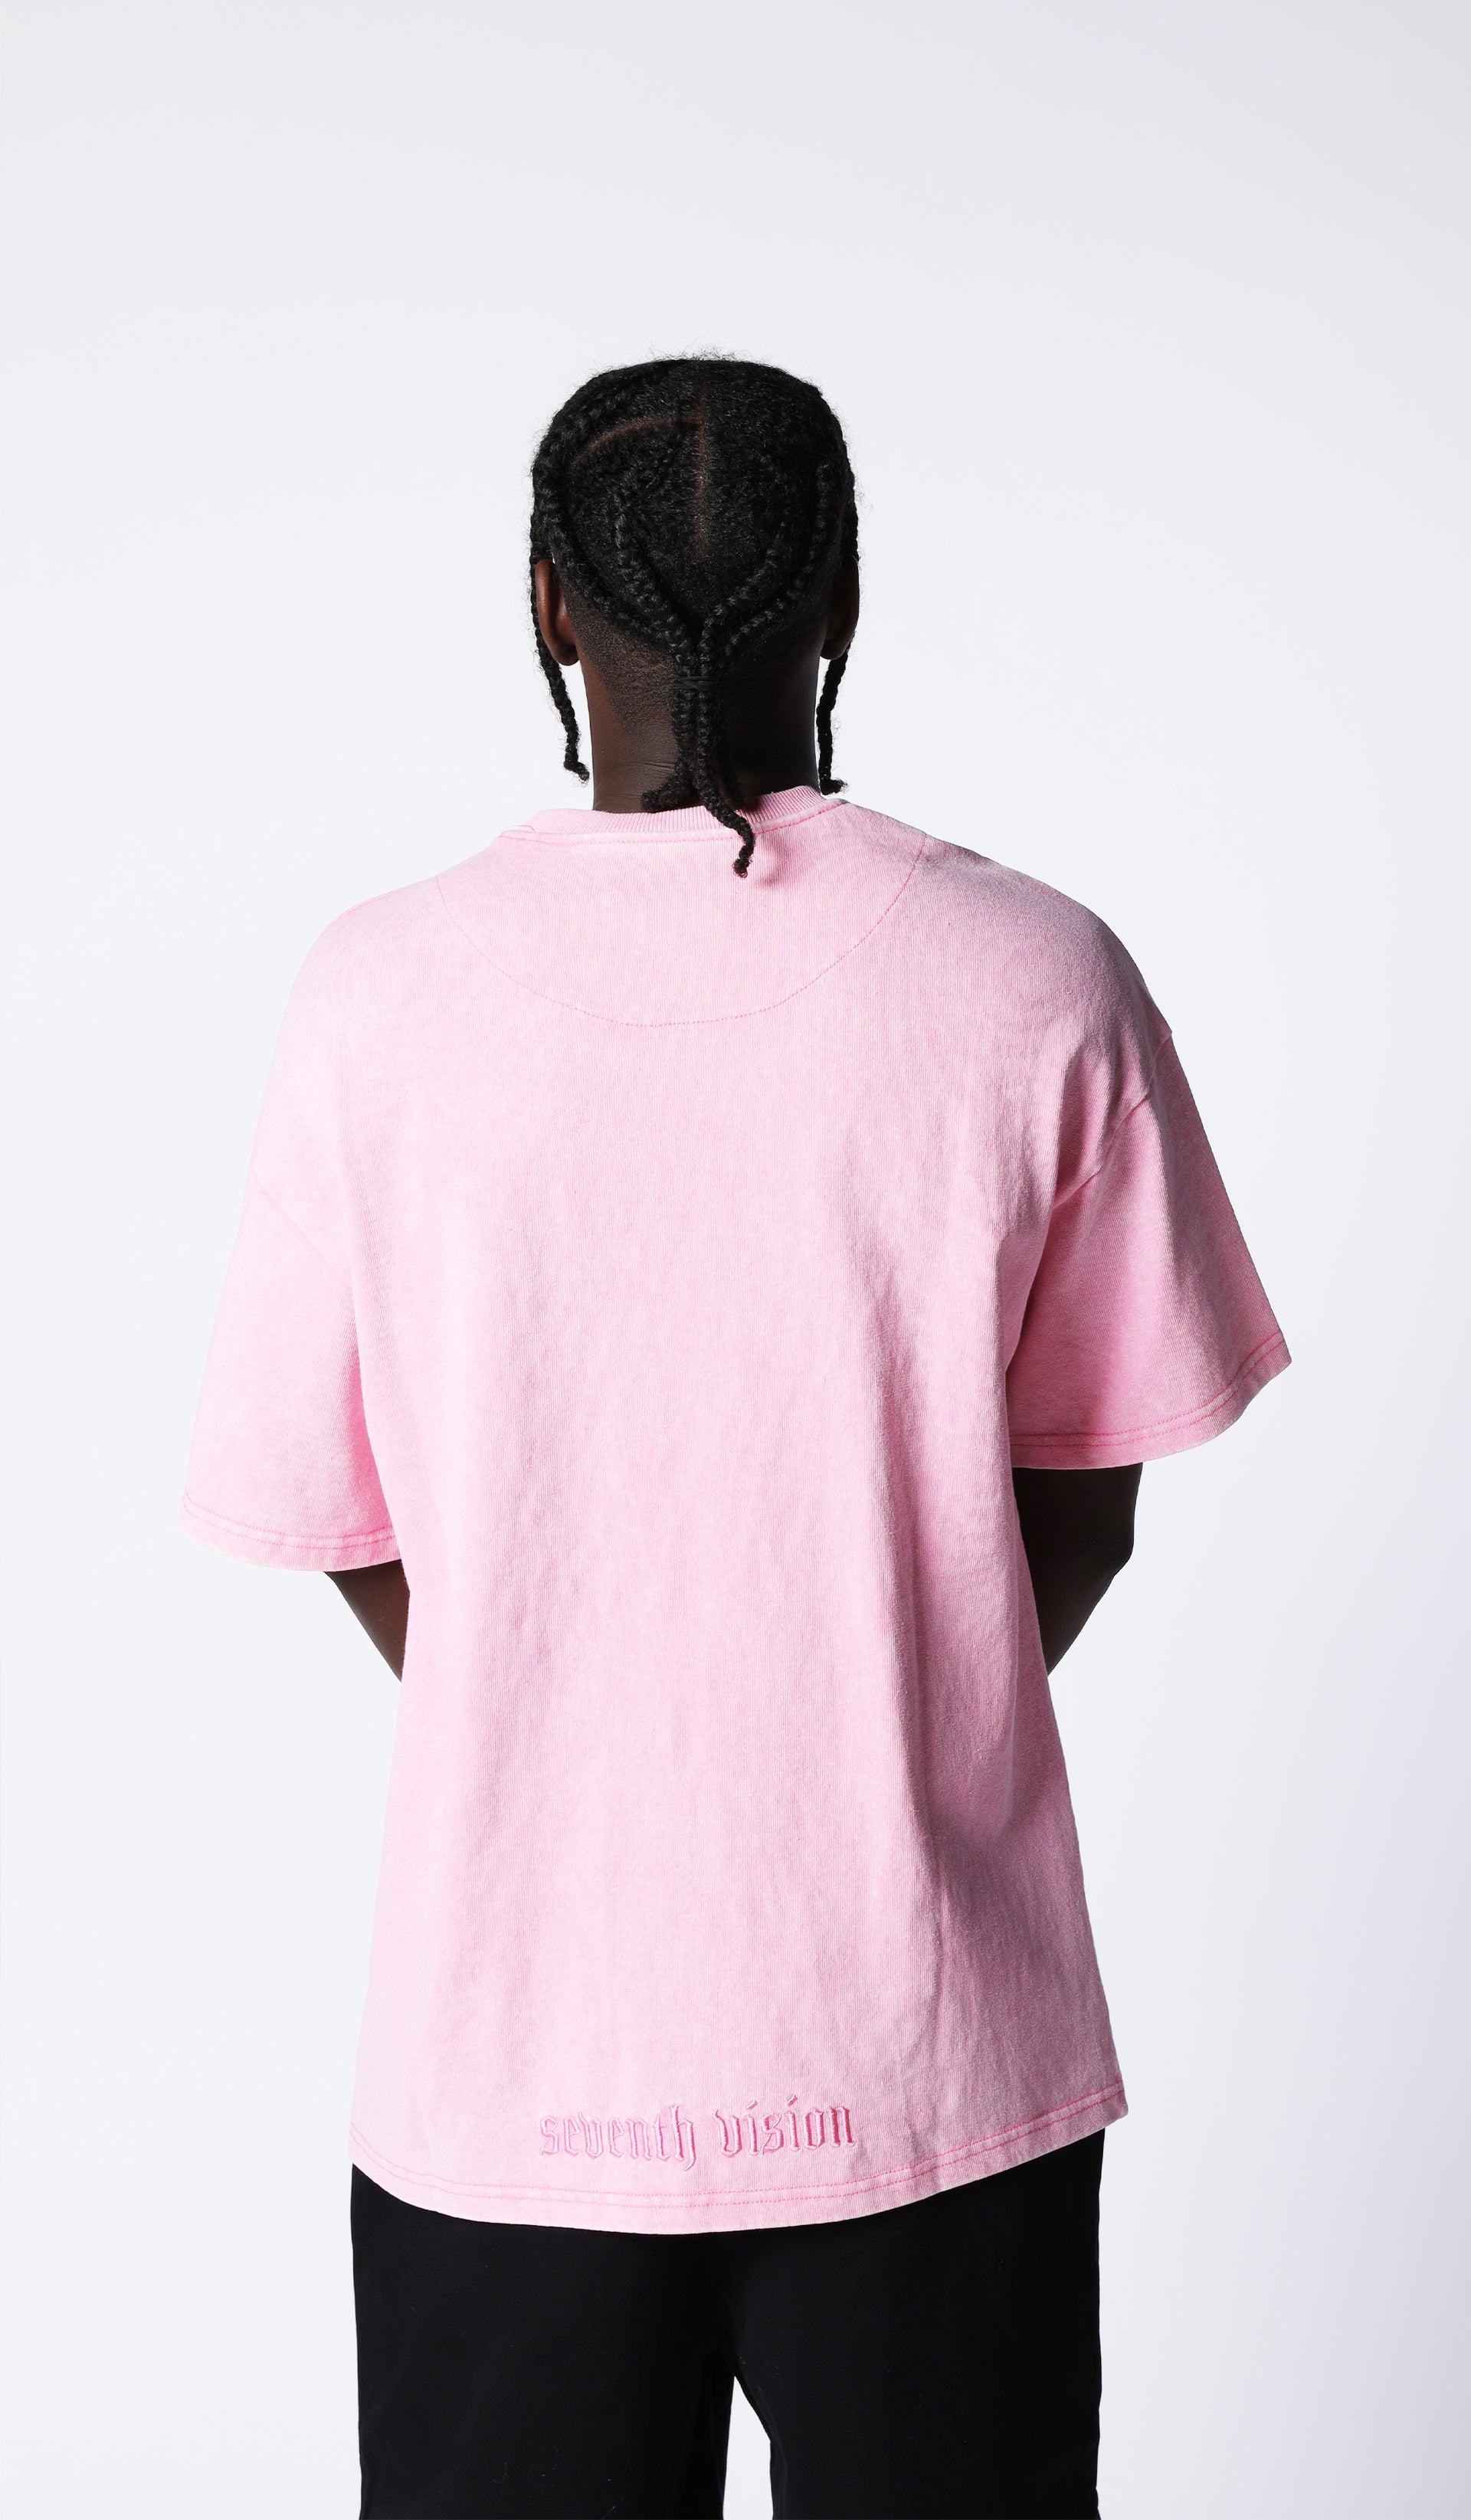 STUCK IN THE 90s T-shirt Pink